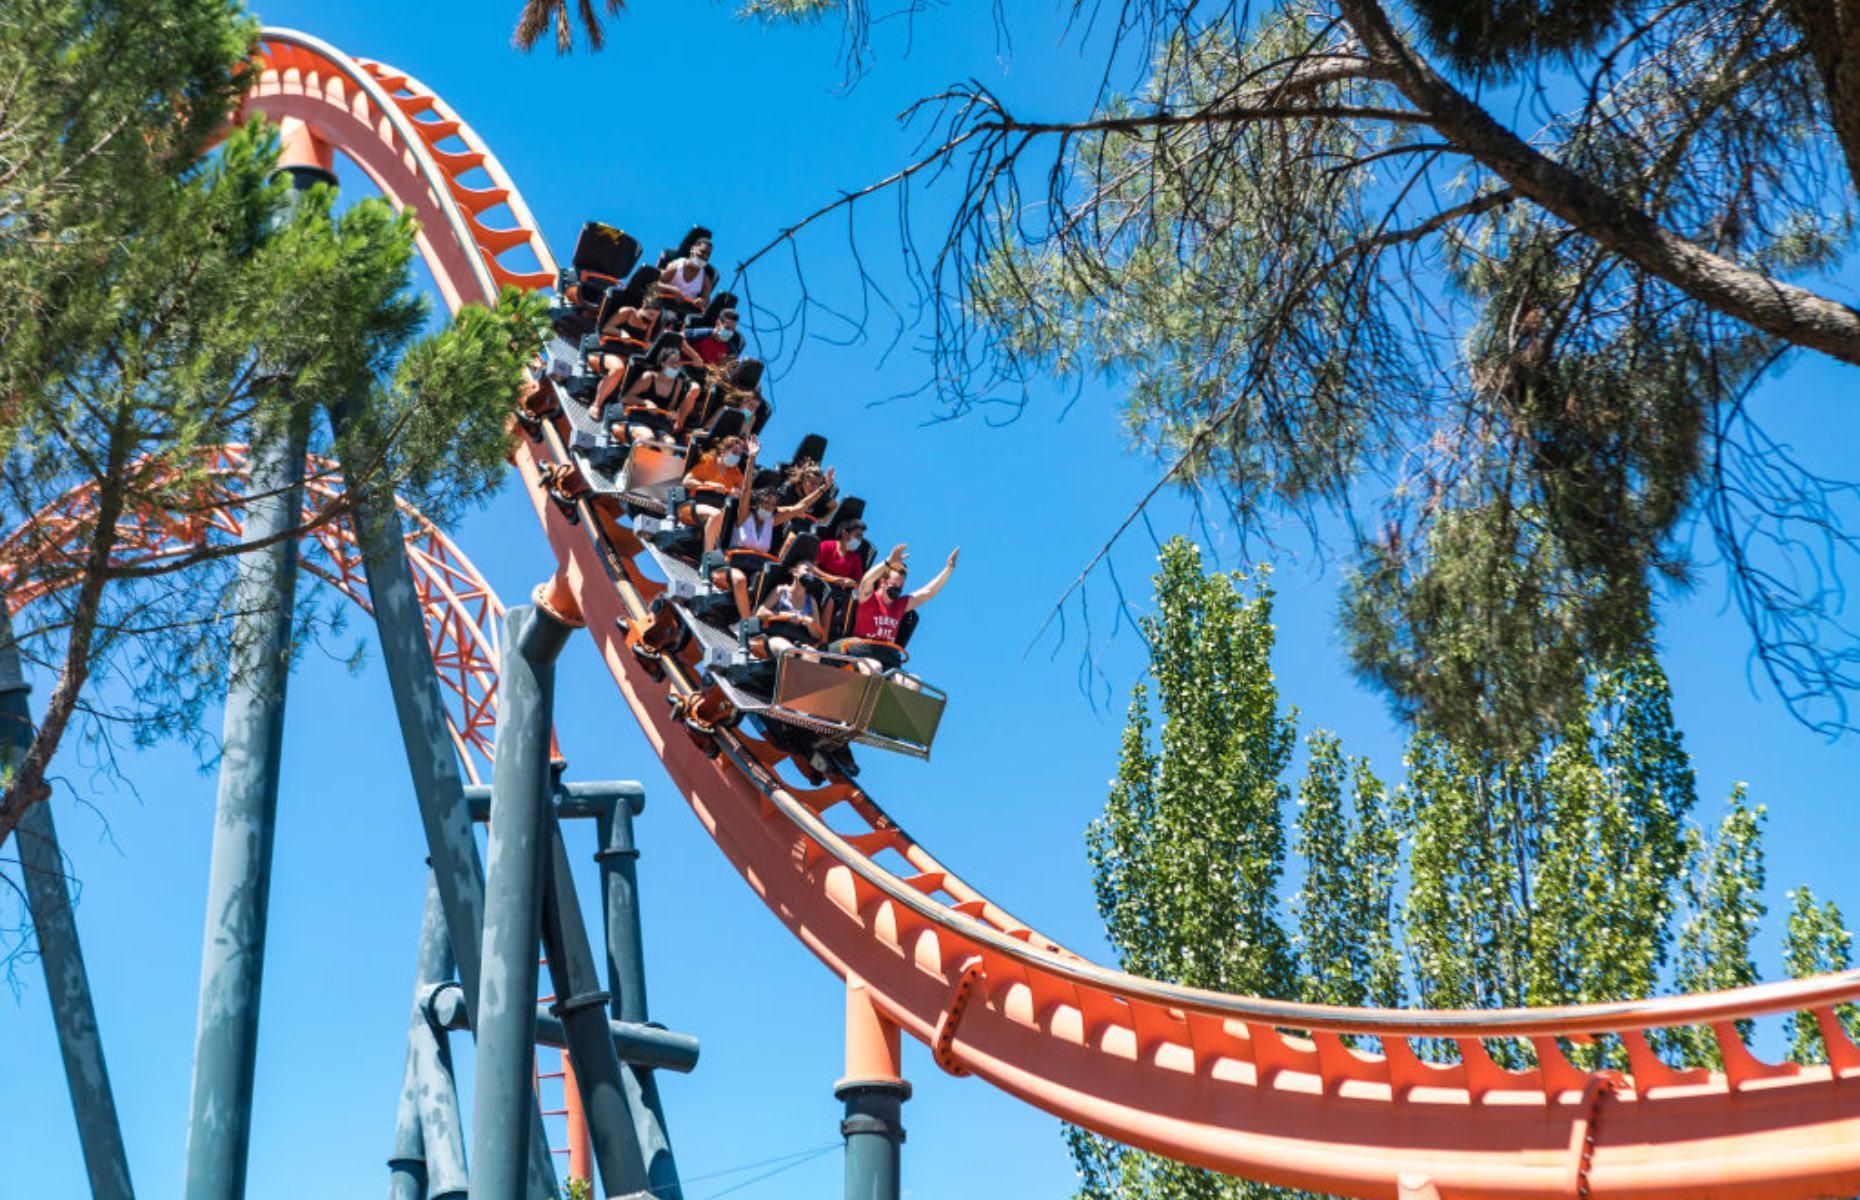 <p>Are you a white-knuckle warrior? A G-force embracer? Or perhaps a 'scream if you wanna go faster' type of rider? Wherever you get your theme park thrills, these record-breaking roller coasters are sure to fuel your fears (in a good way).</p>  <p>From the world's fastest coaster to the oldest, we've rounded up the rides that have made the record books. Buckle up!</p>  <p><strong>Read on to discover the world's record-breaking roller coasters...</strong></p>